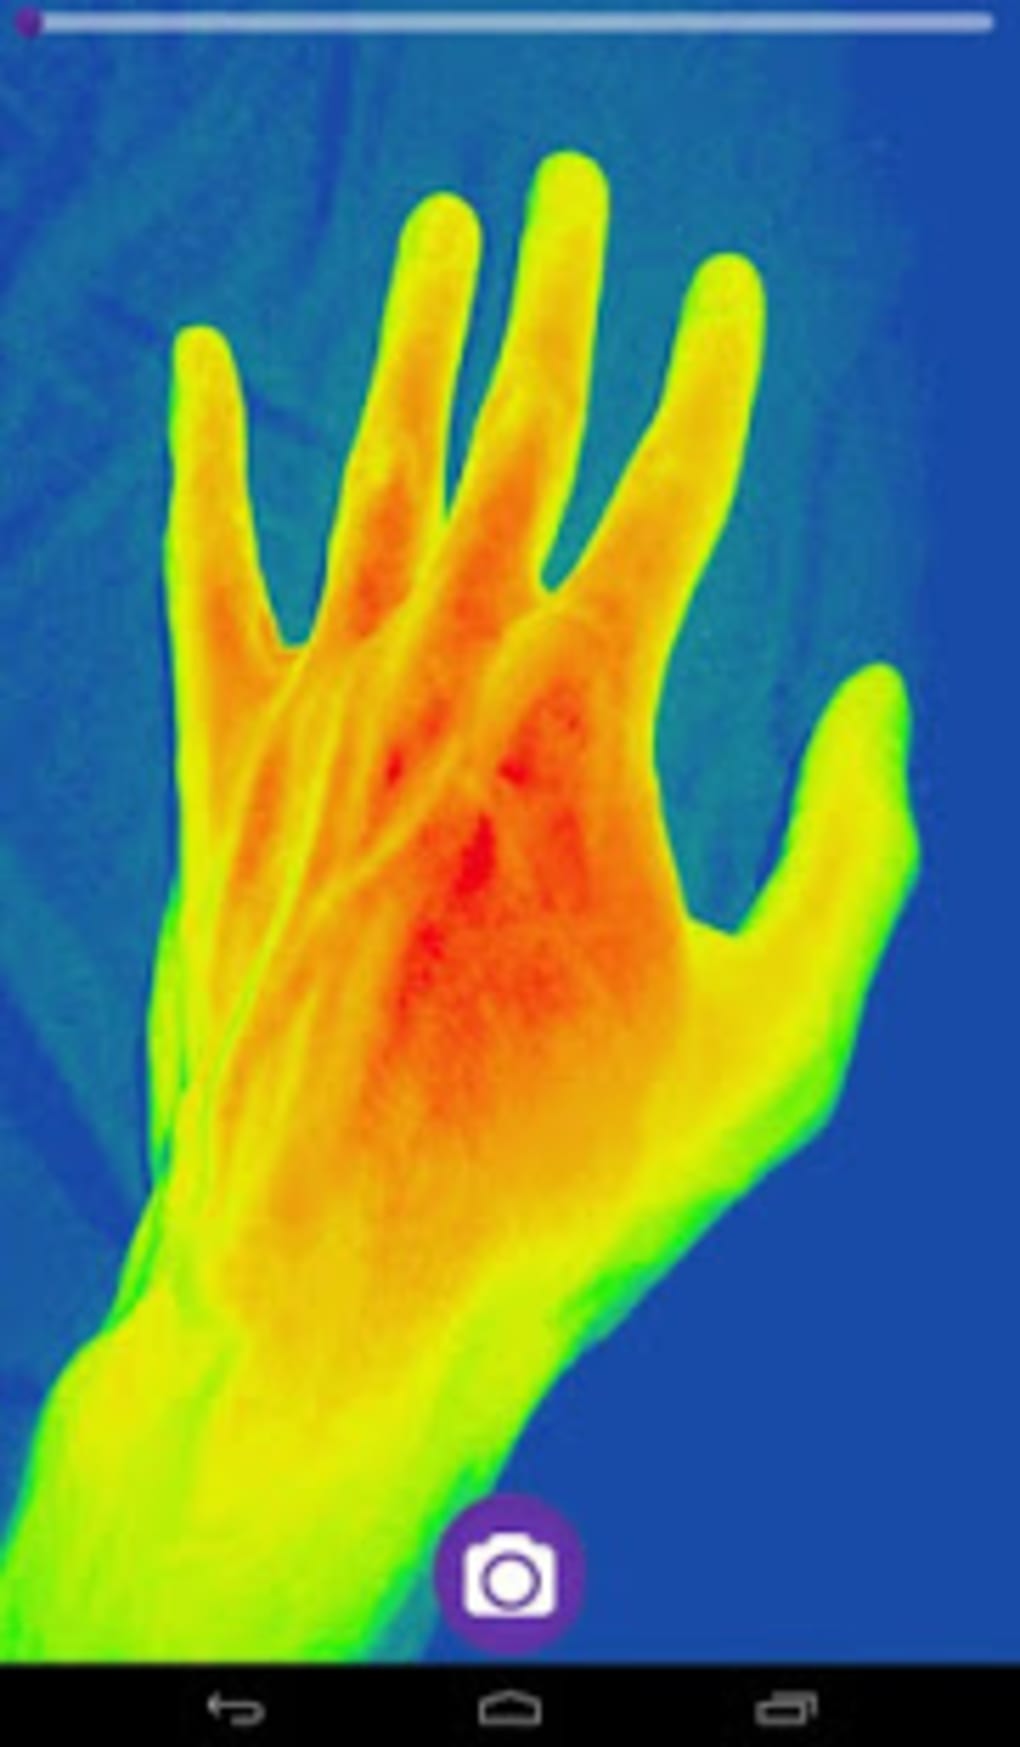 Thermal Camera Hd Effect Simulator Apk For Android - Download